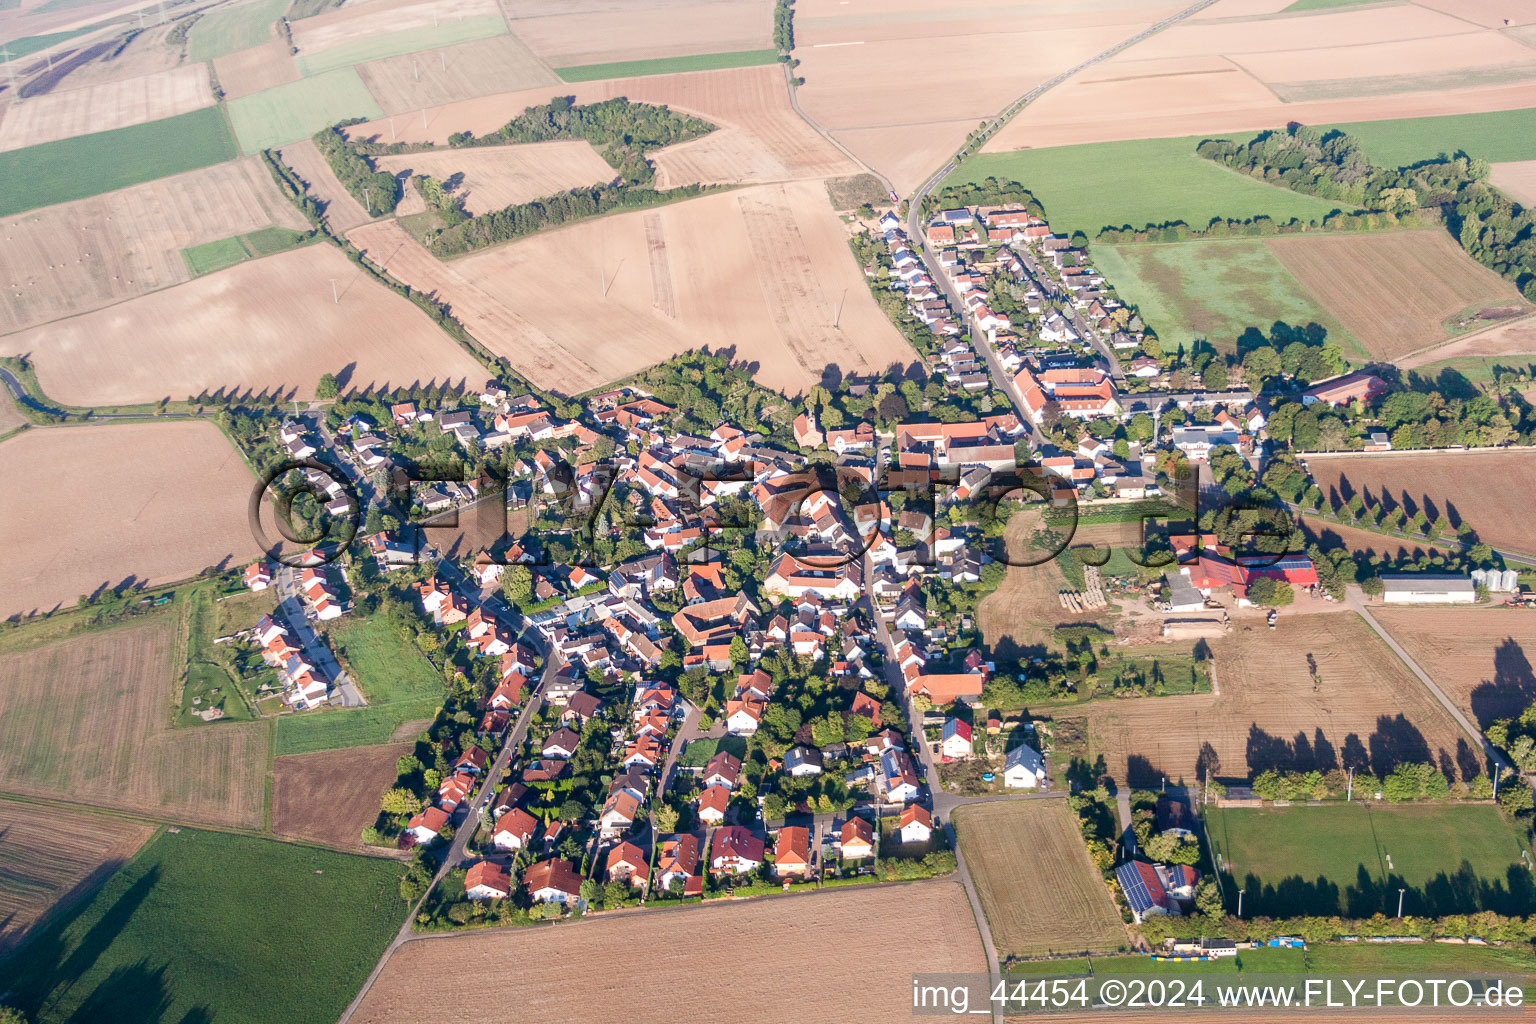 Aerial photograpy of Village - view on the edge of agricultural fields and farmland in Lautersheim in the state Rhineland-Palatinate, Germany